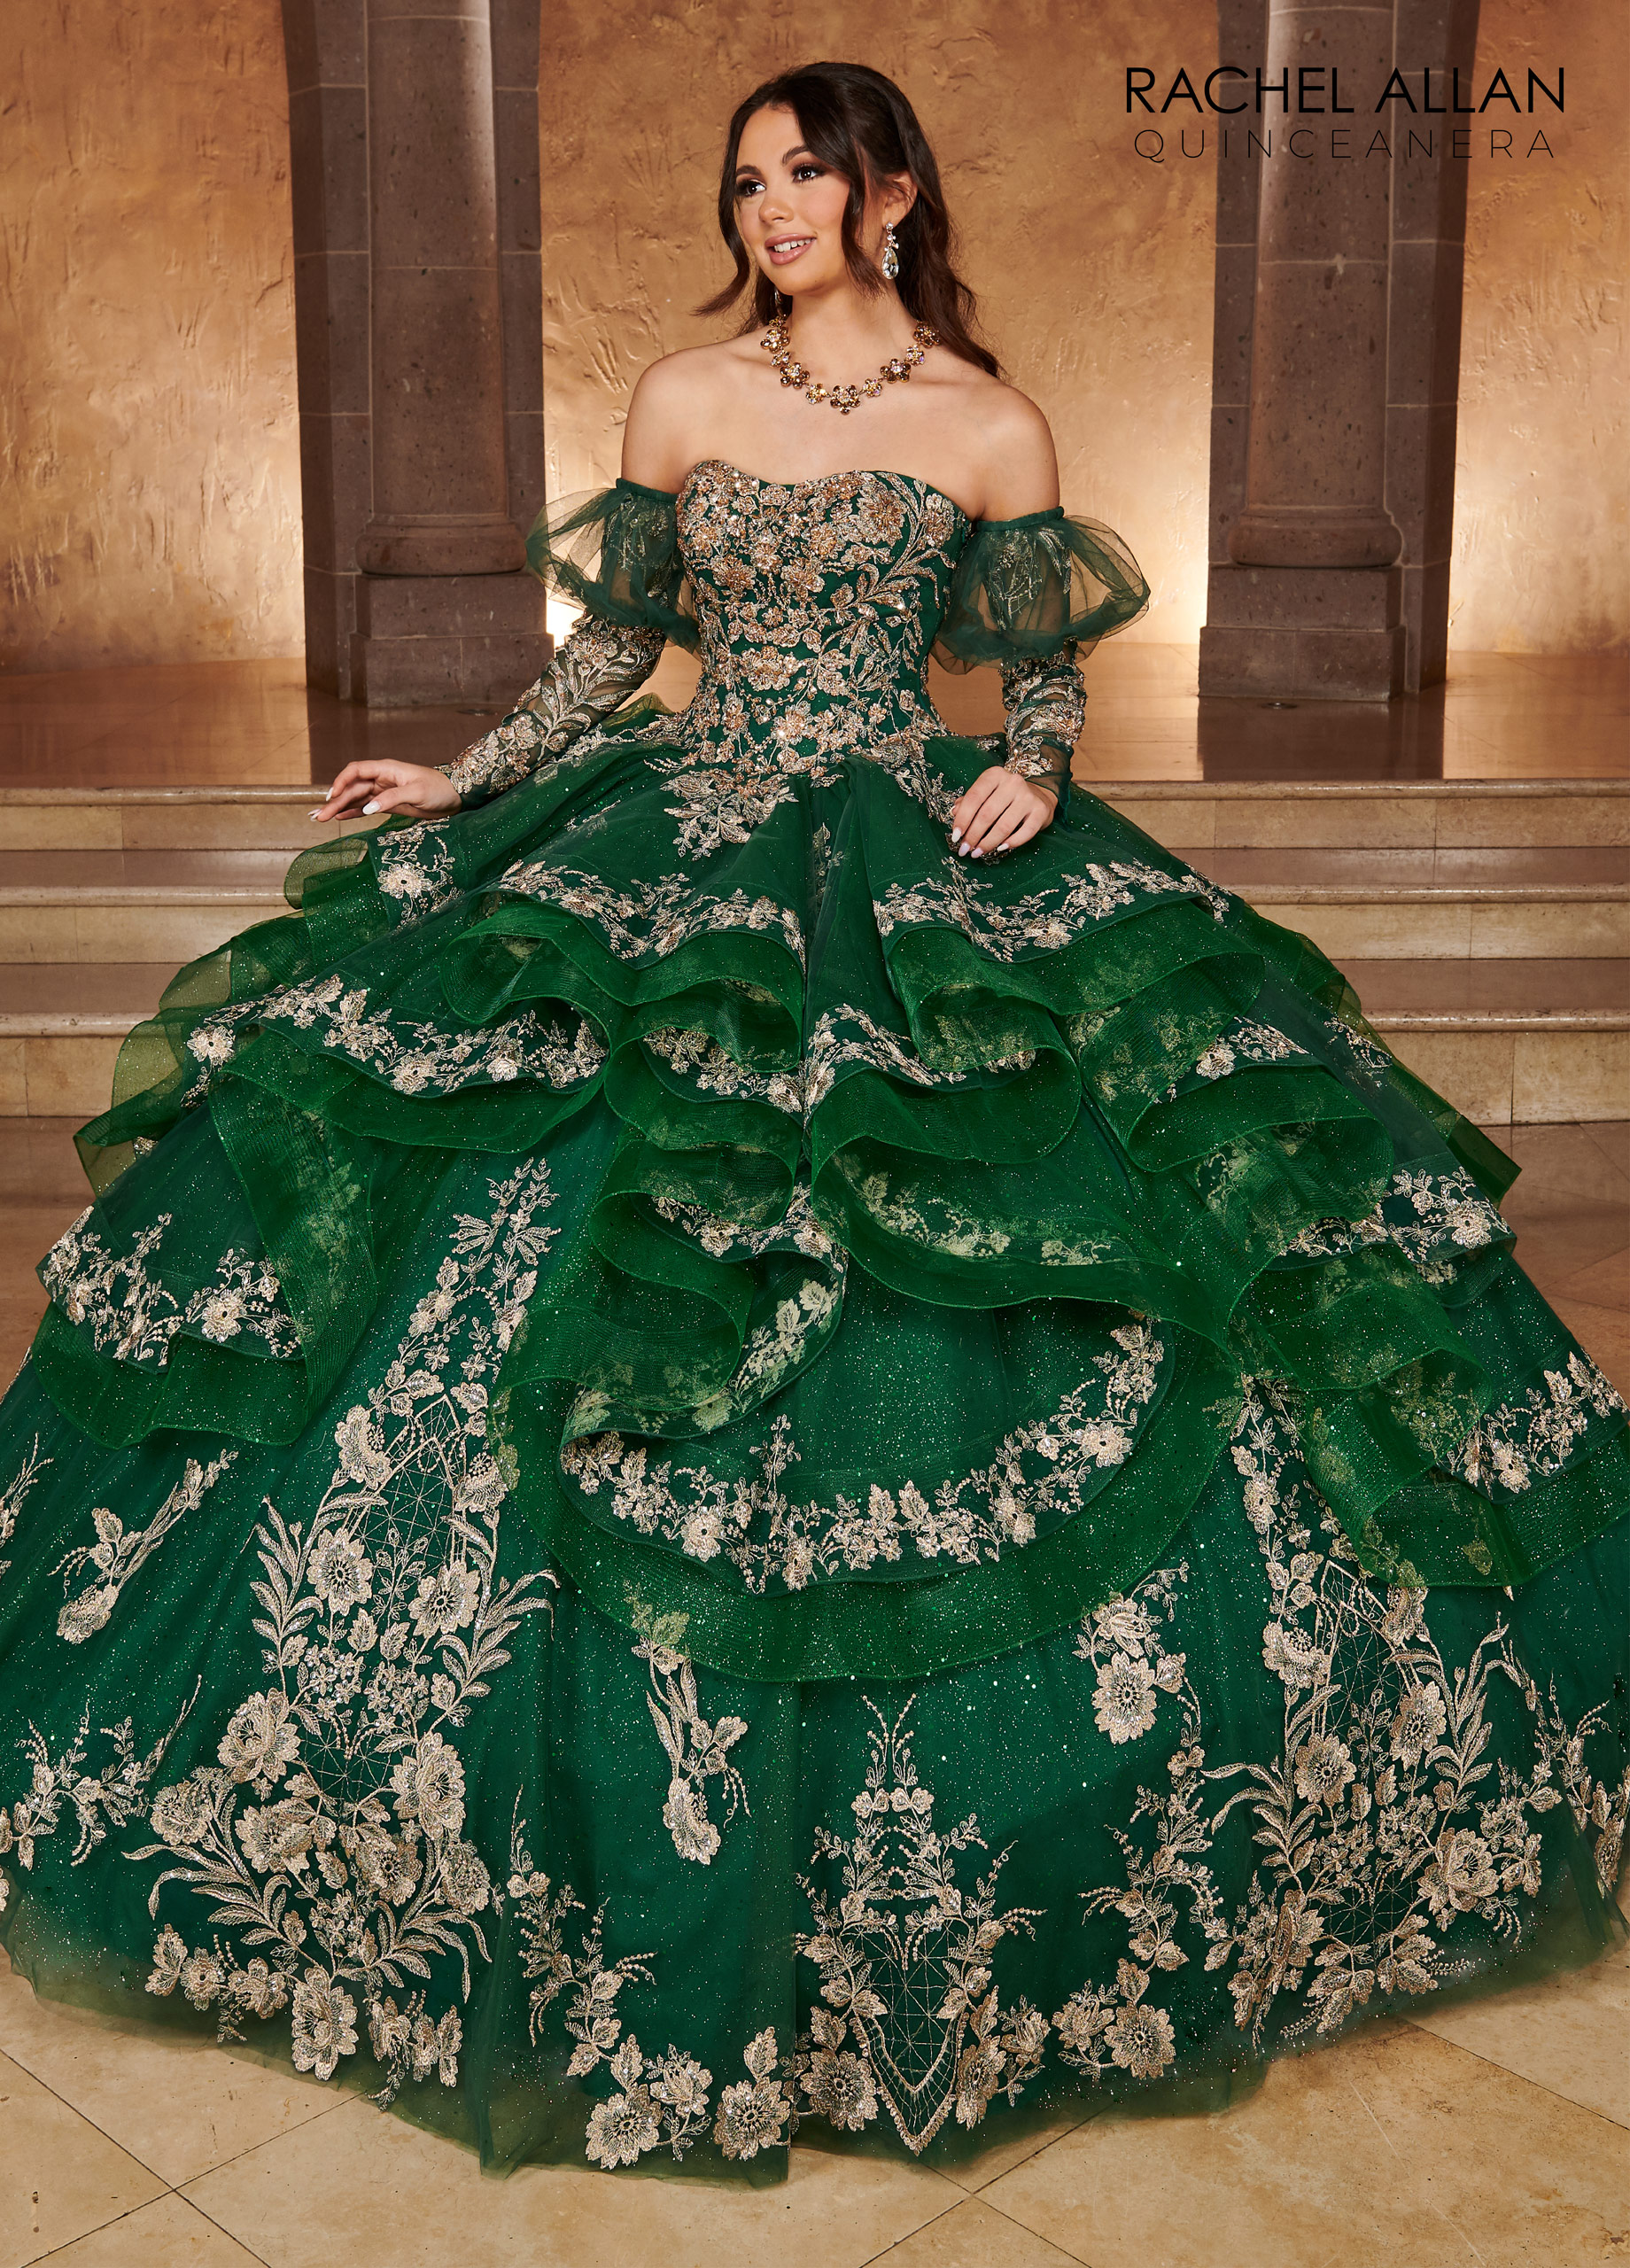 Strapless Ball Gowns Alta Couture in EMERALD ROSE GOLD Color